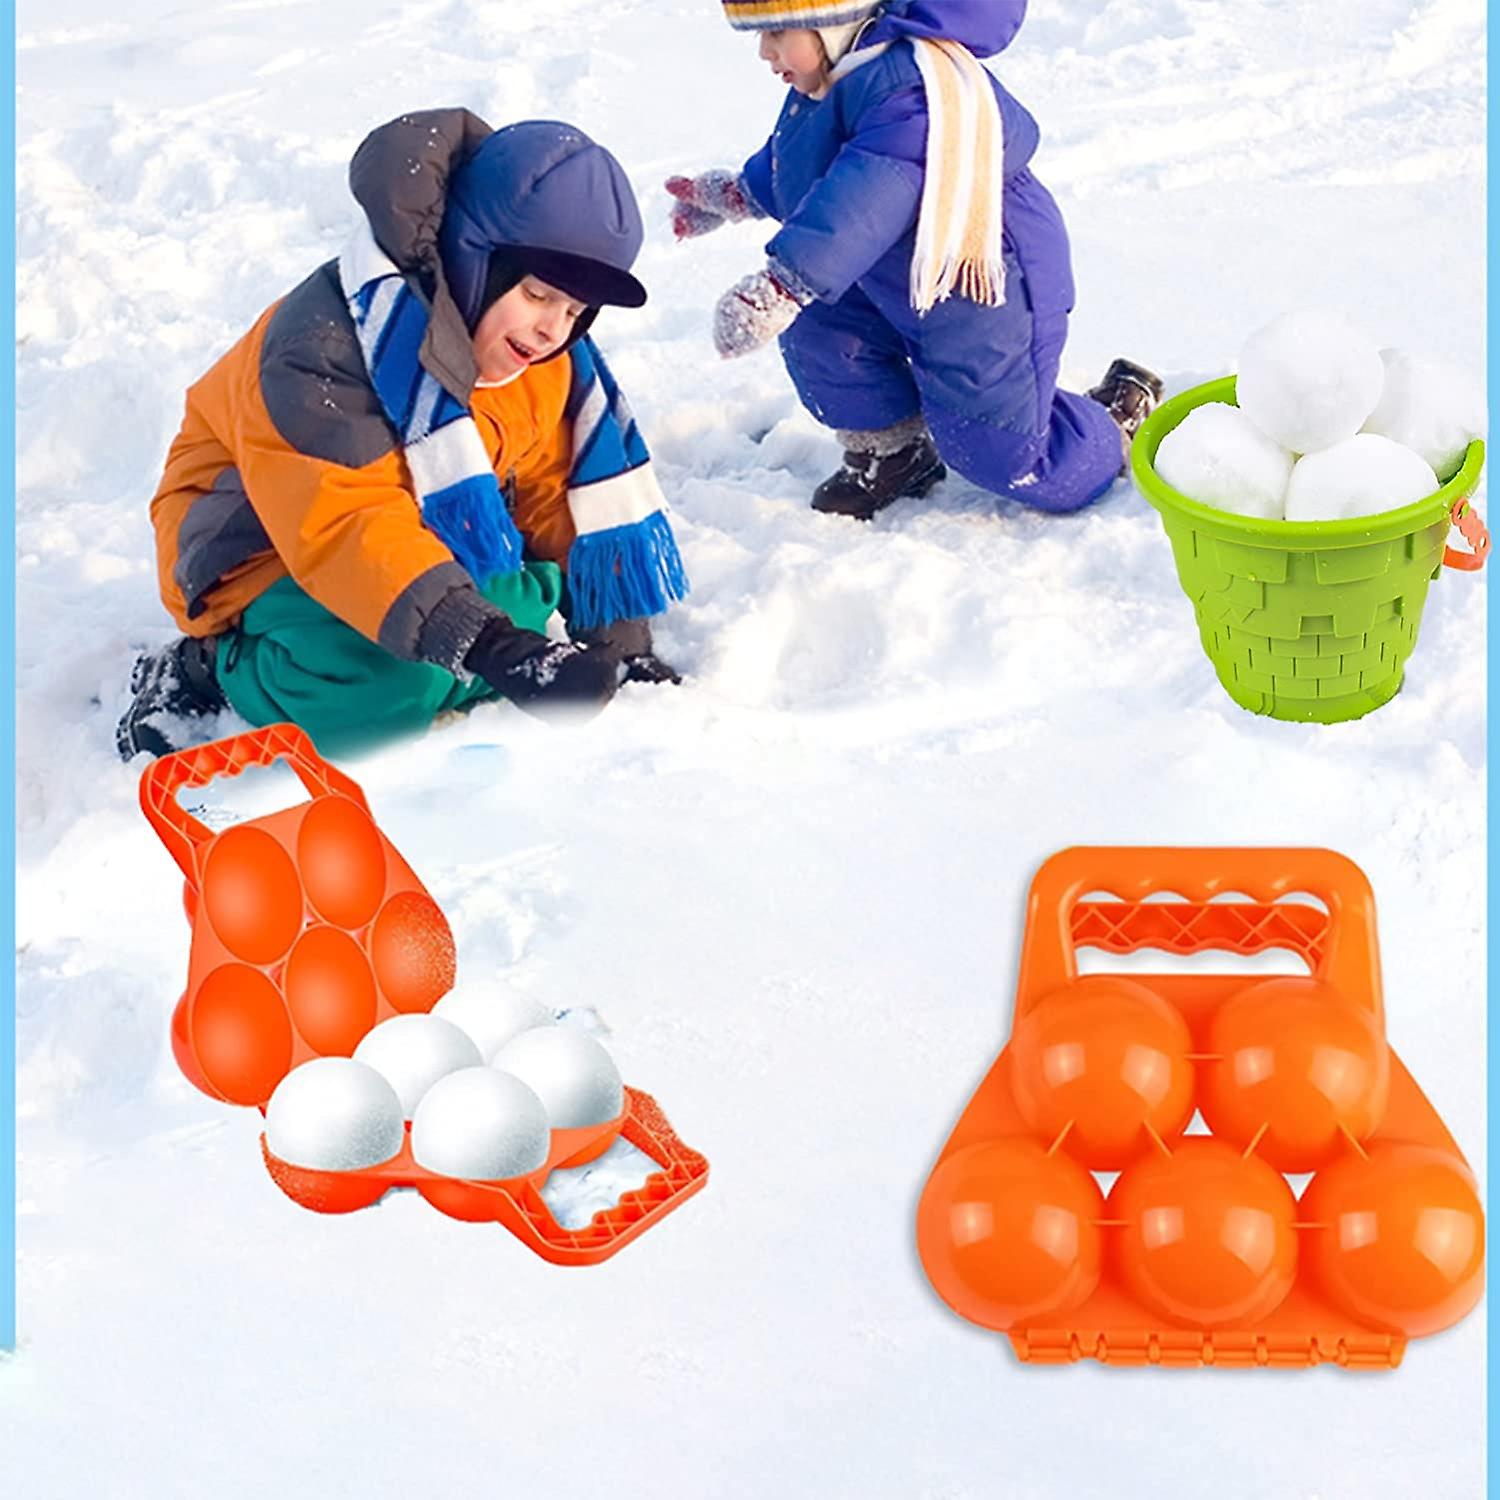 5 In 1 Snowball Marker Snow Toys - 2 Packs Winter Snow Toys Kit Snowball Marker Toys For Kids Outdoor (random Color)